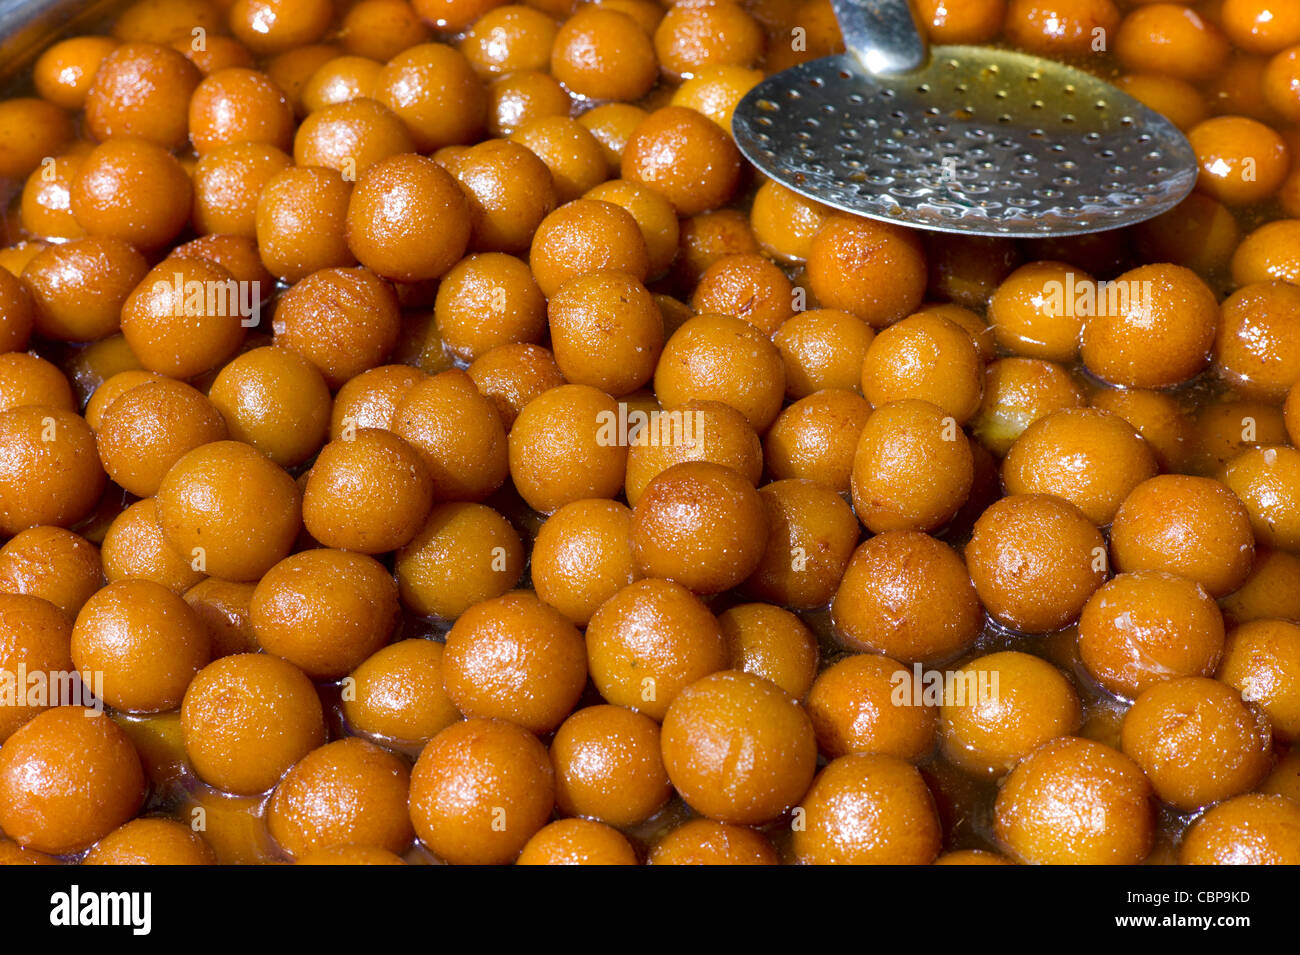 Deep-fried snack foods on sale in old town market Udaipur, Rajasthan, Western India, Stock Photo